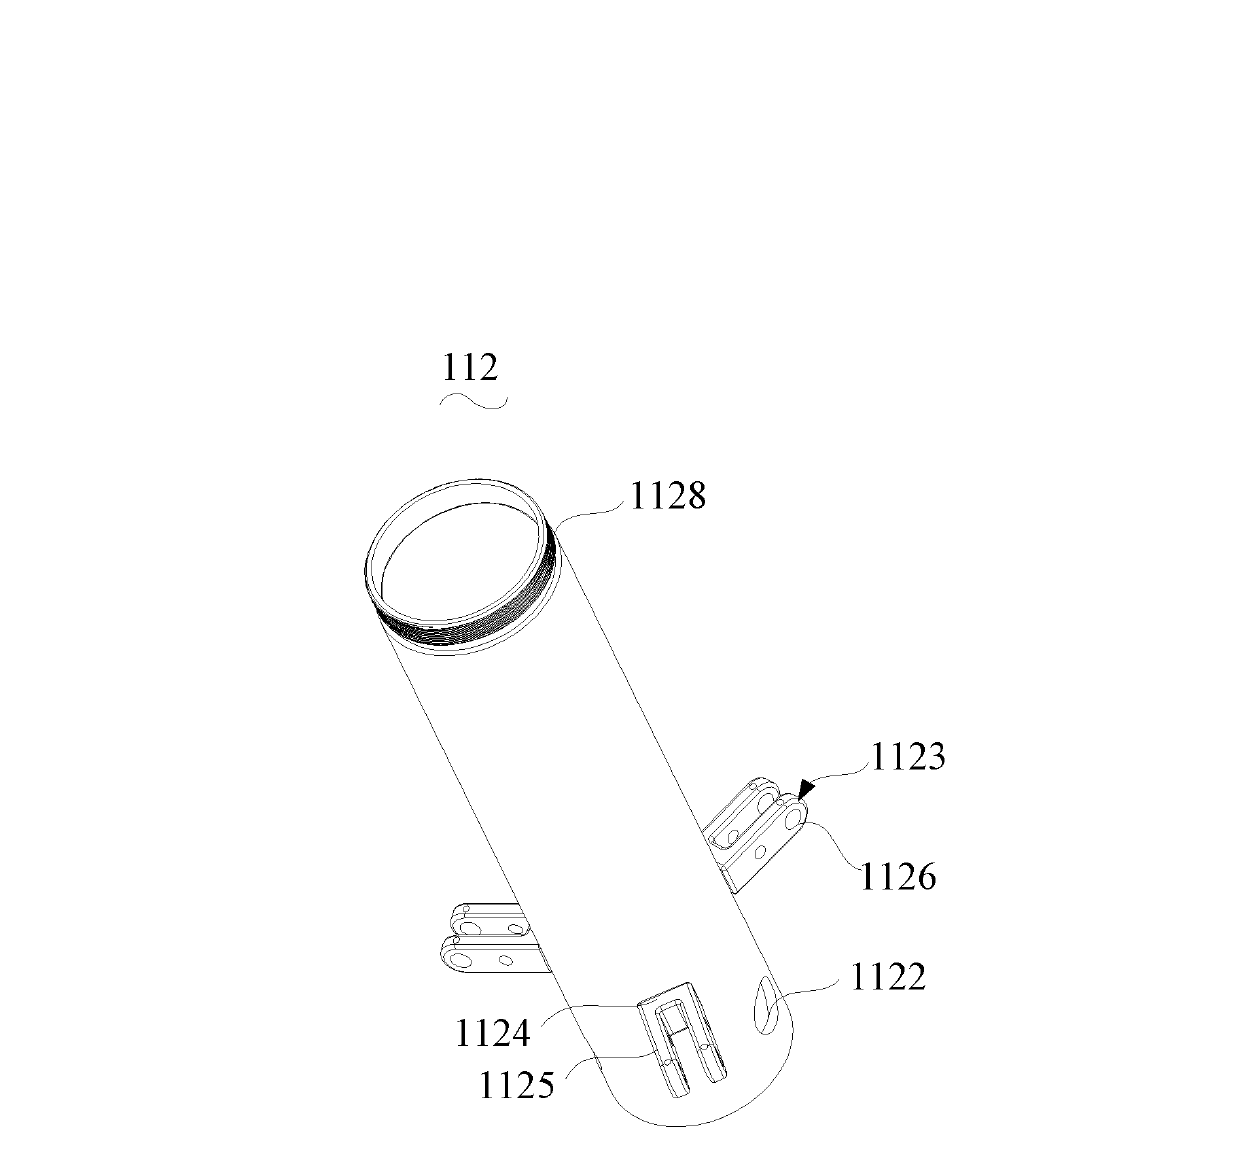 Lamp supporting device